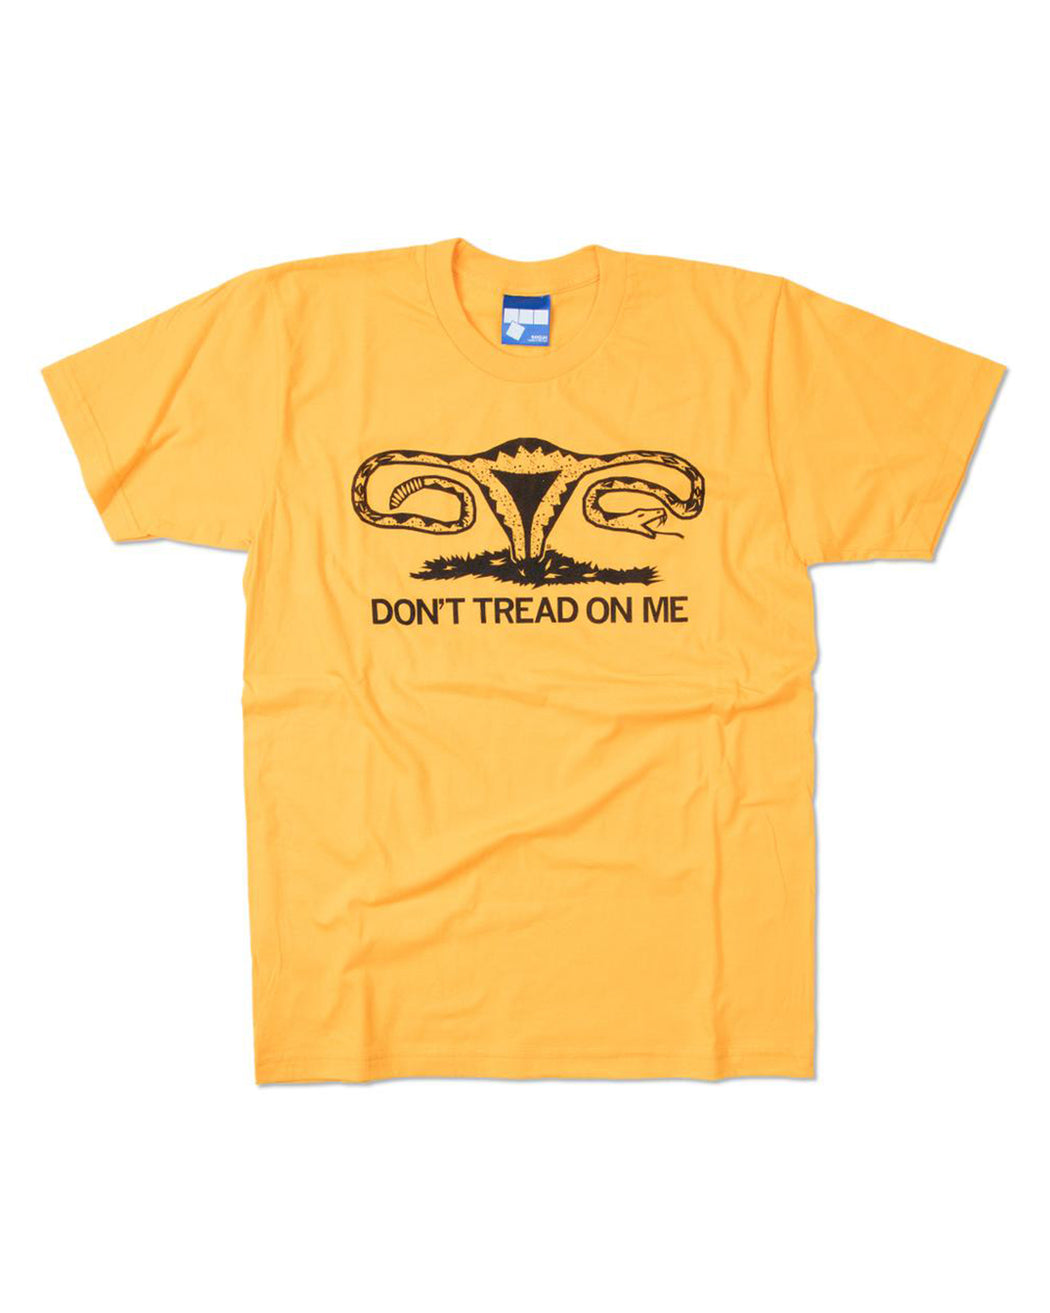 RAYGUN:Don't Tread on Me T-Shirt – Unisex Fit,ANOMIE